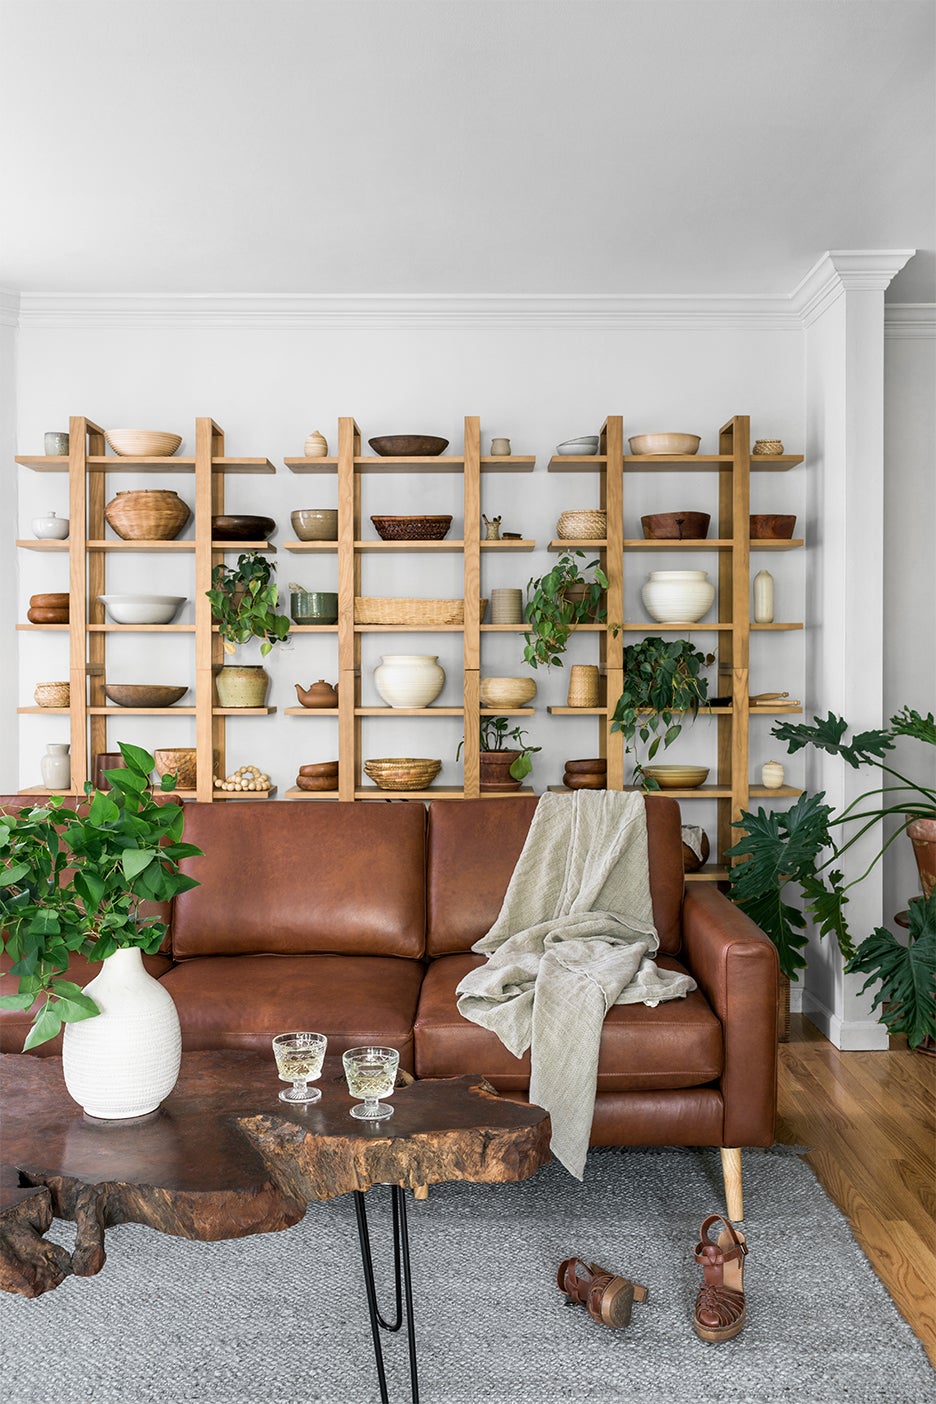 Pottery filled shelves and leather sofa